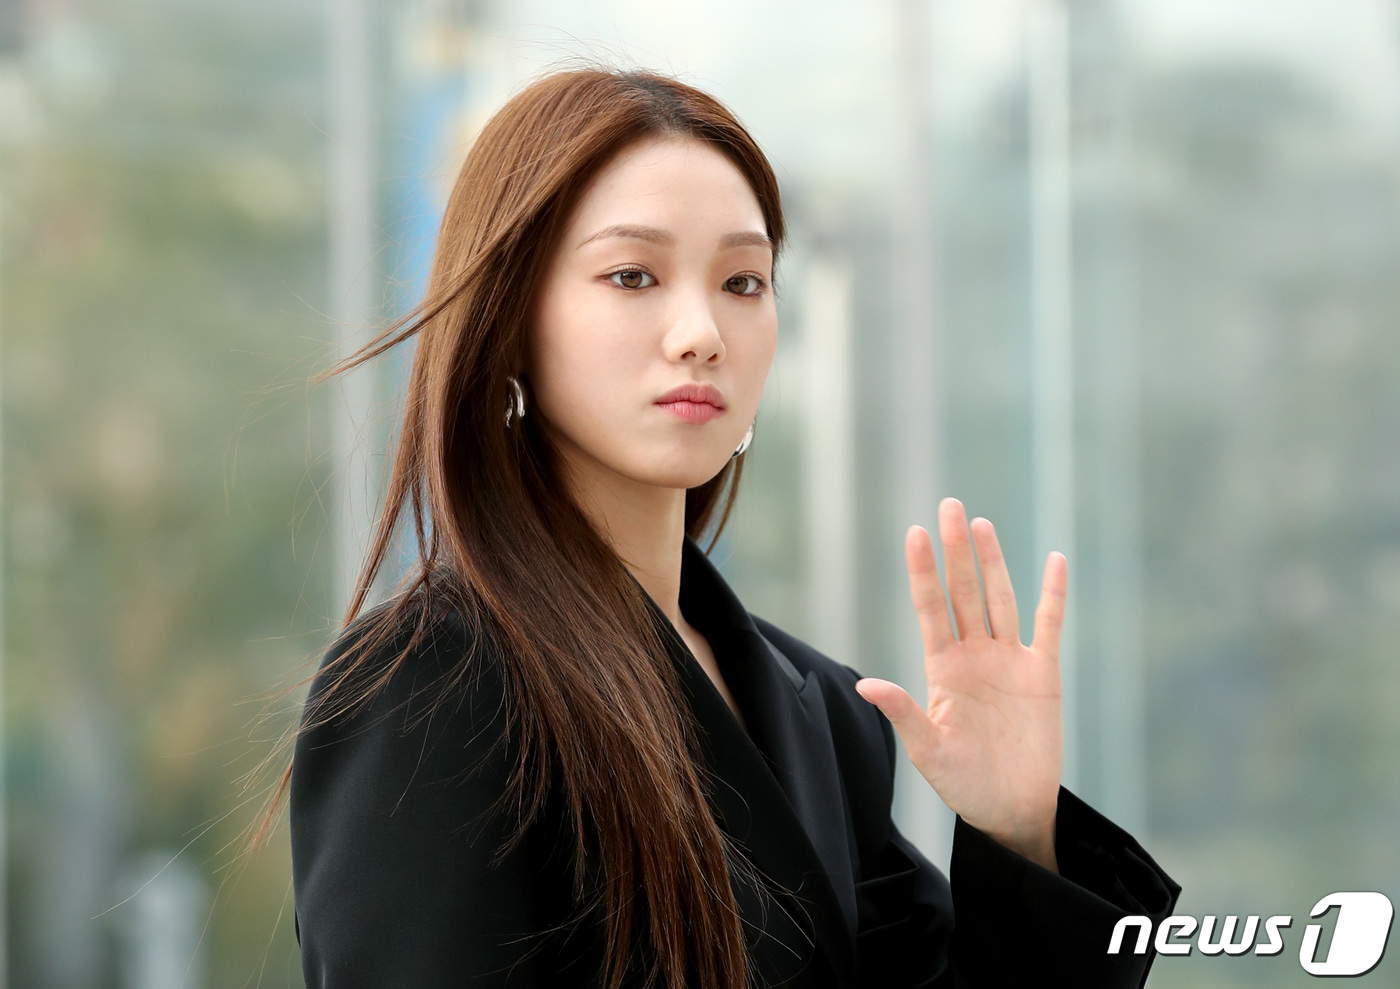 Seoul:) = Actor Lee Sung-kyung attends a fashion brand event held at a Department Store in Apgujeong-dong, Seoul on the afternoon of the 18th.